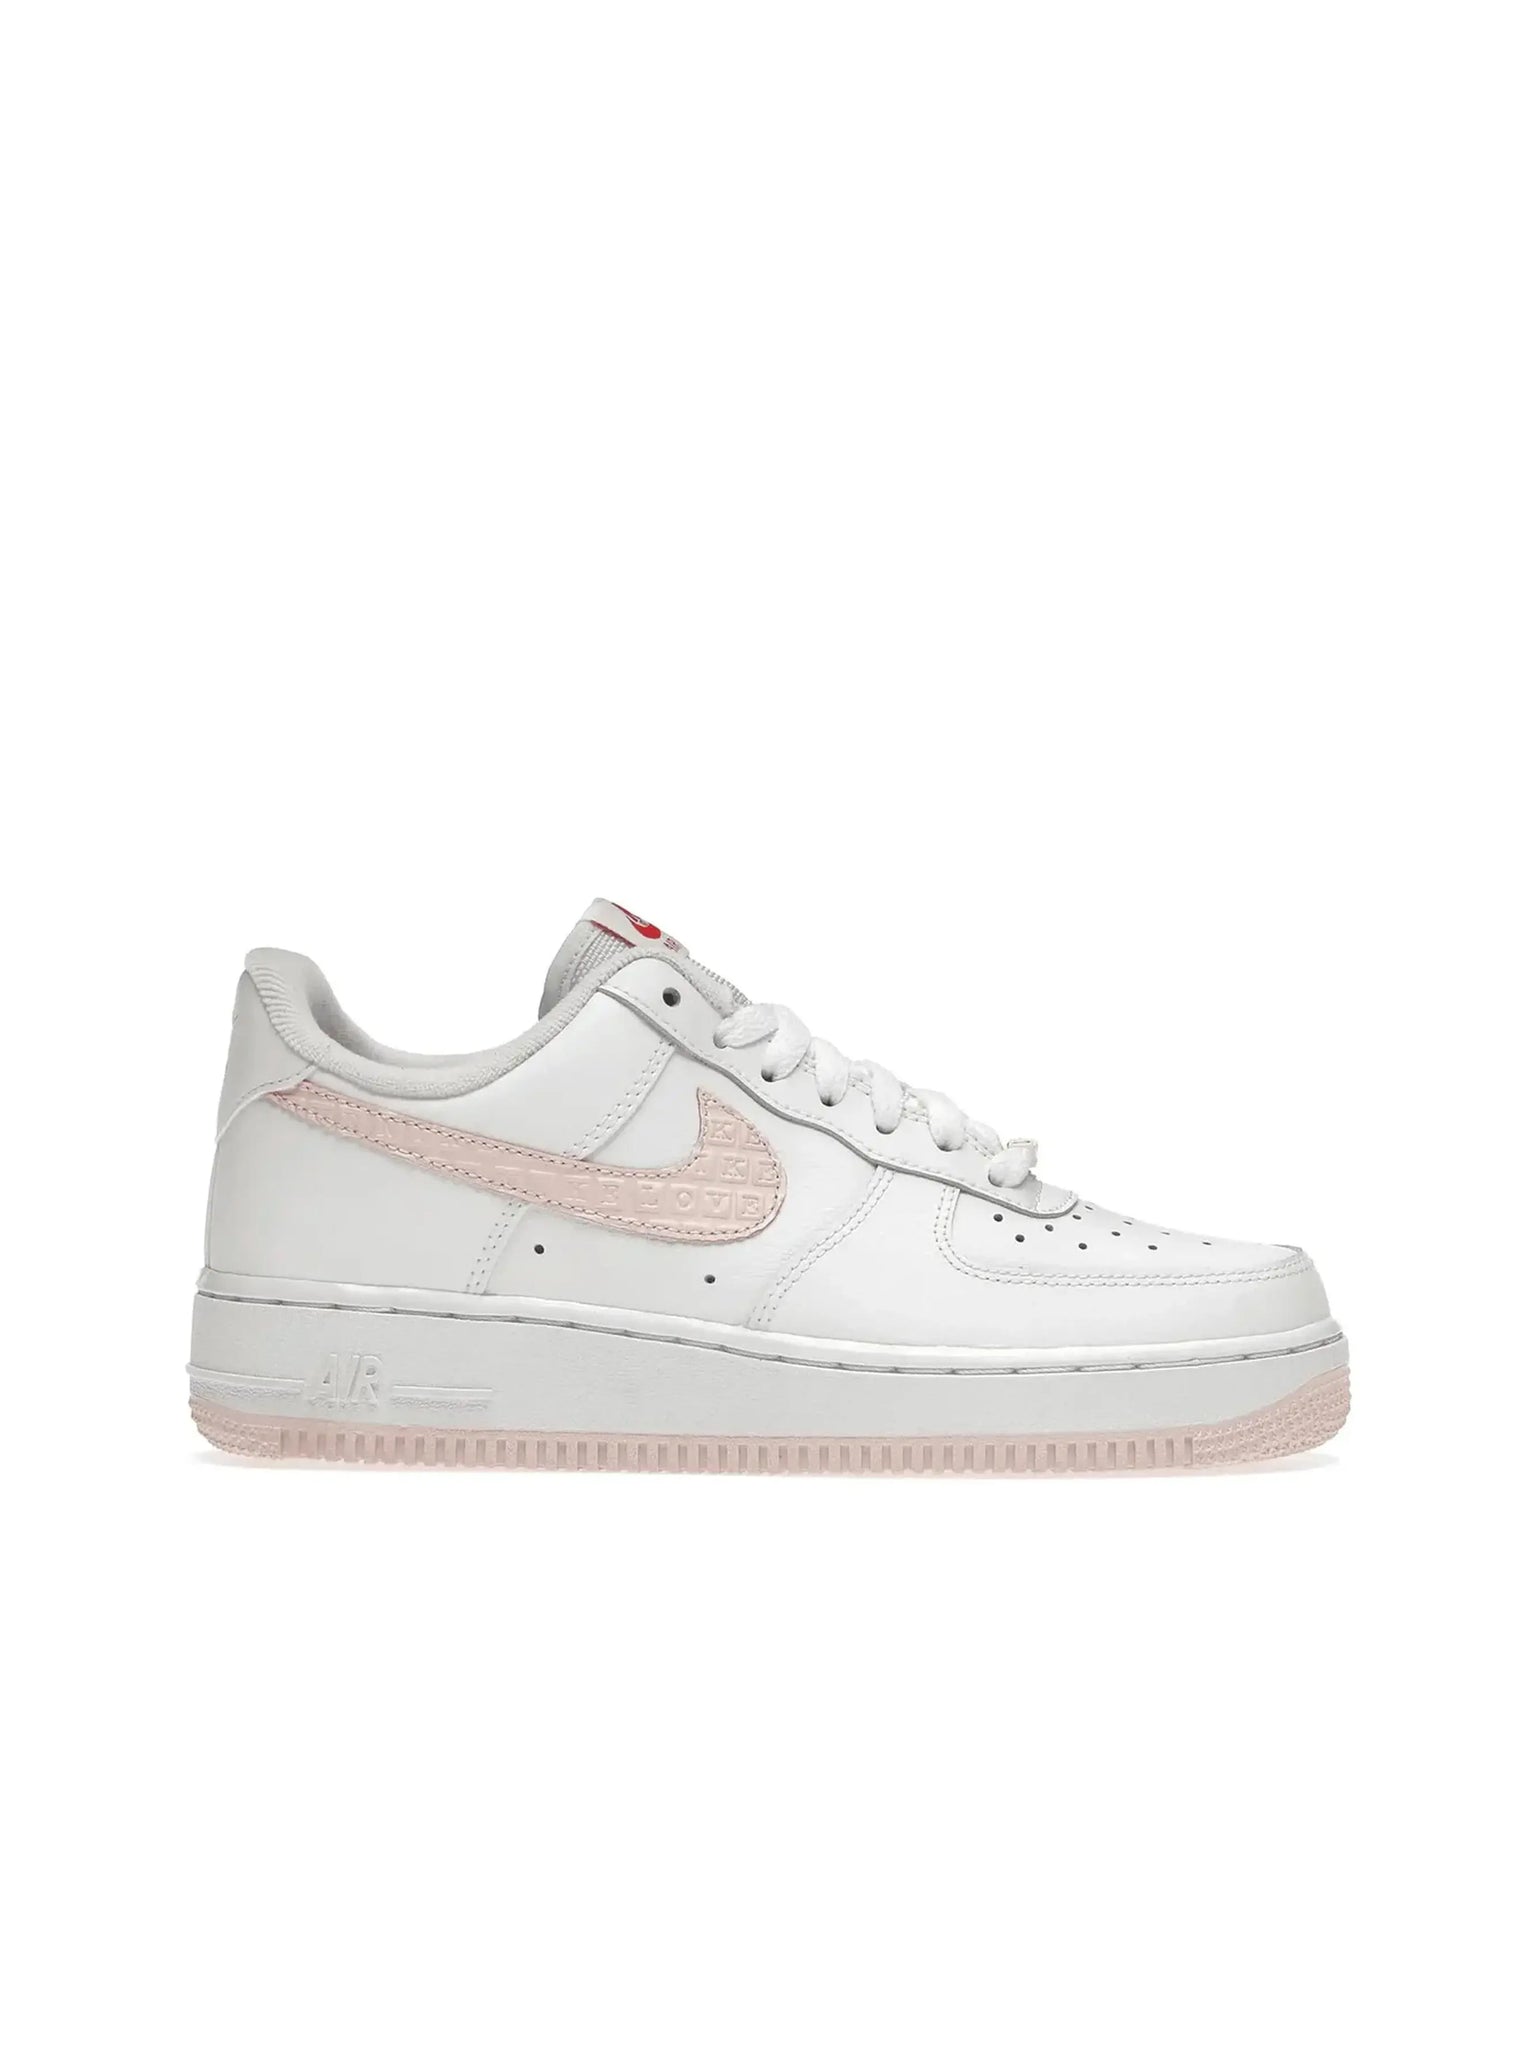 Nike Air Force 1 Low VD Valentine's Day (2022) (Women's) in Melbourne, Australia - Prior